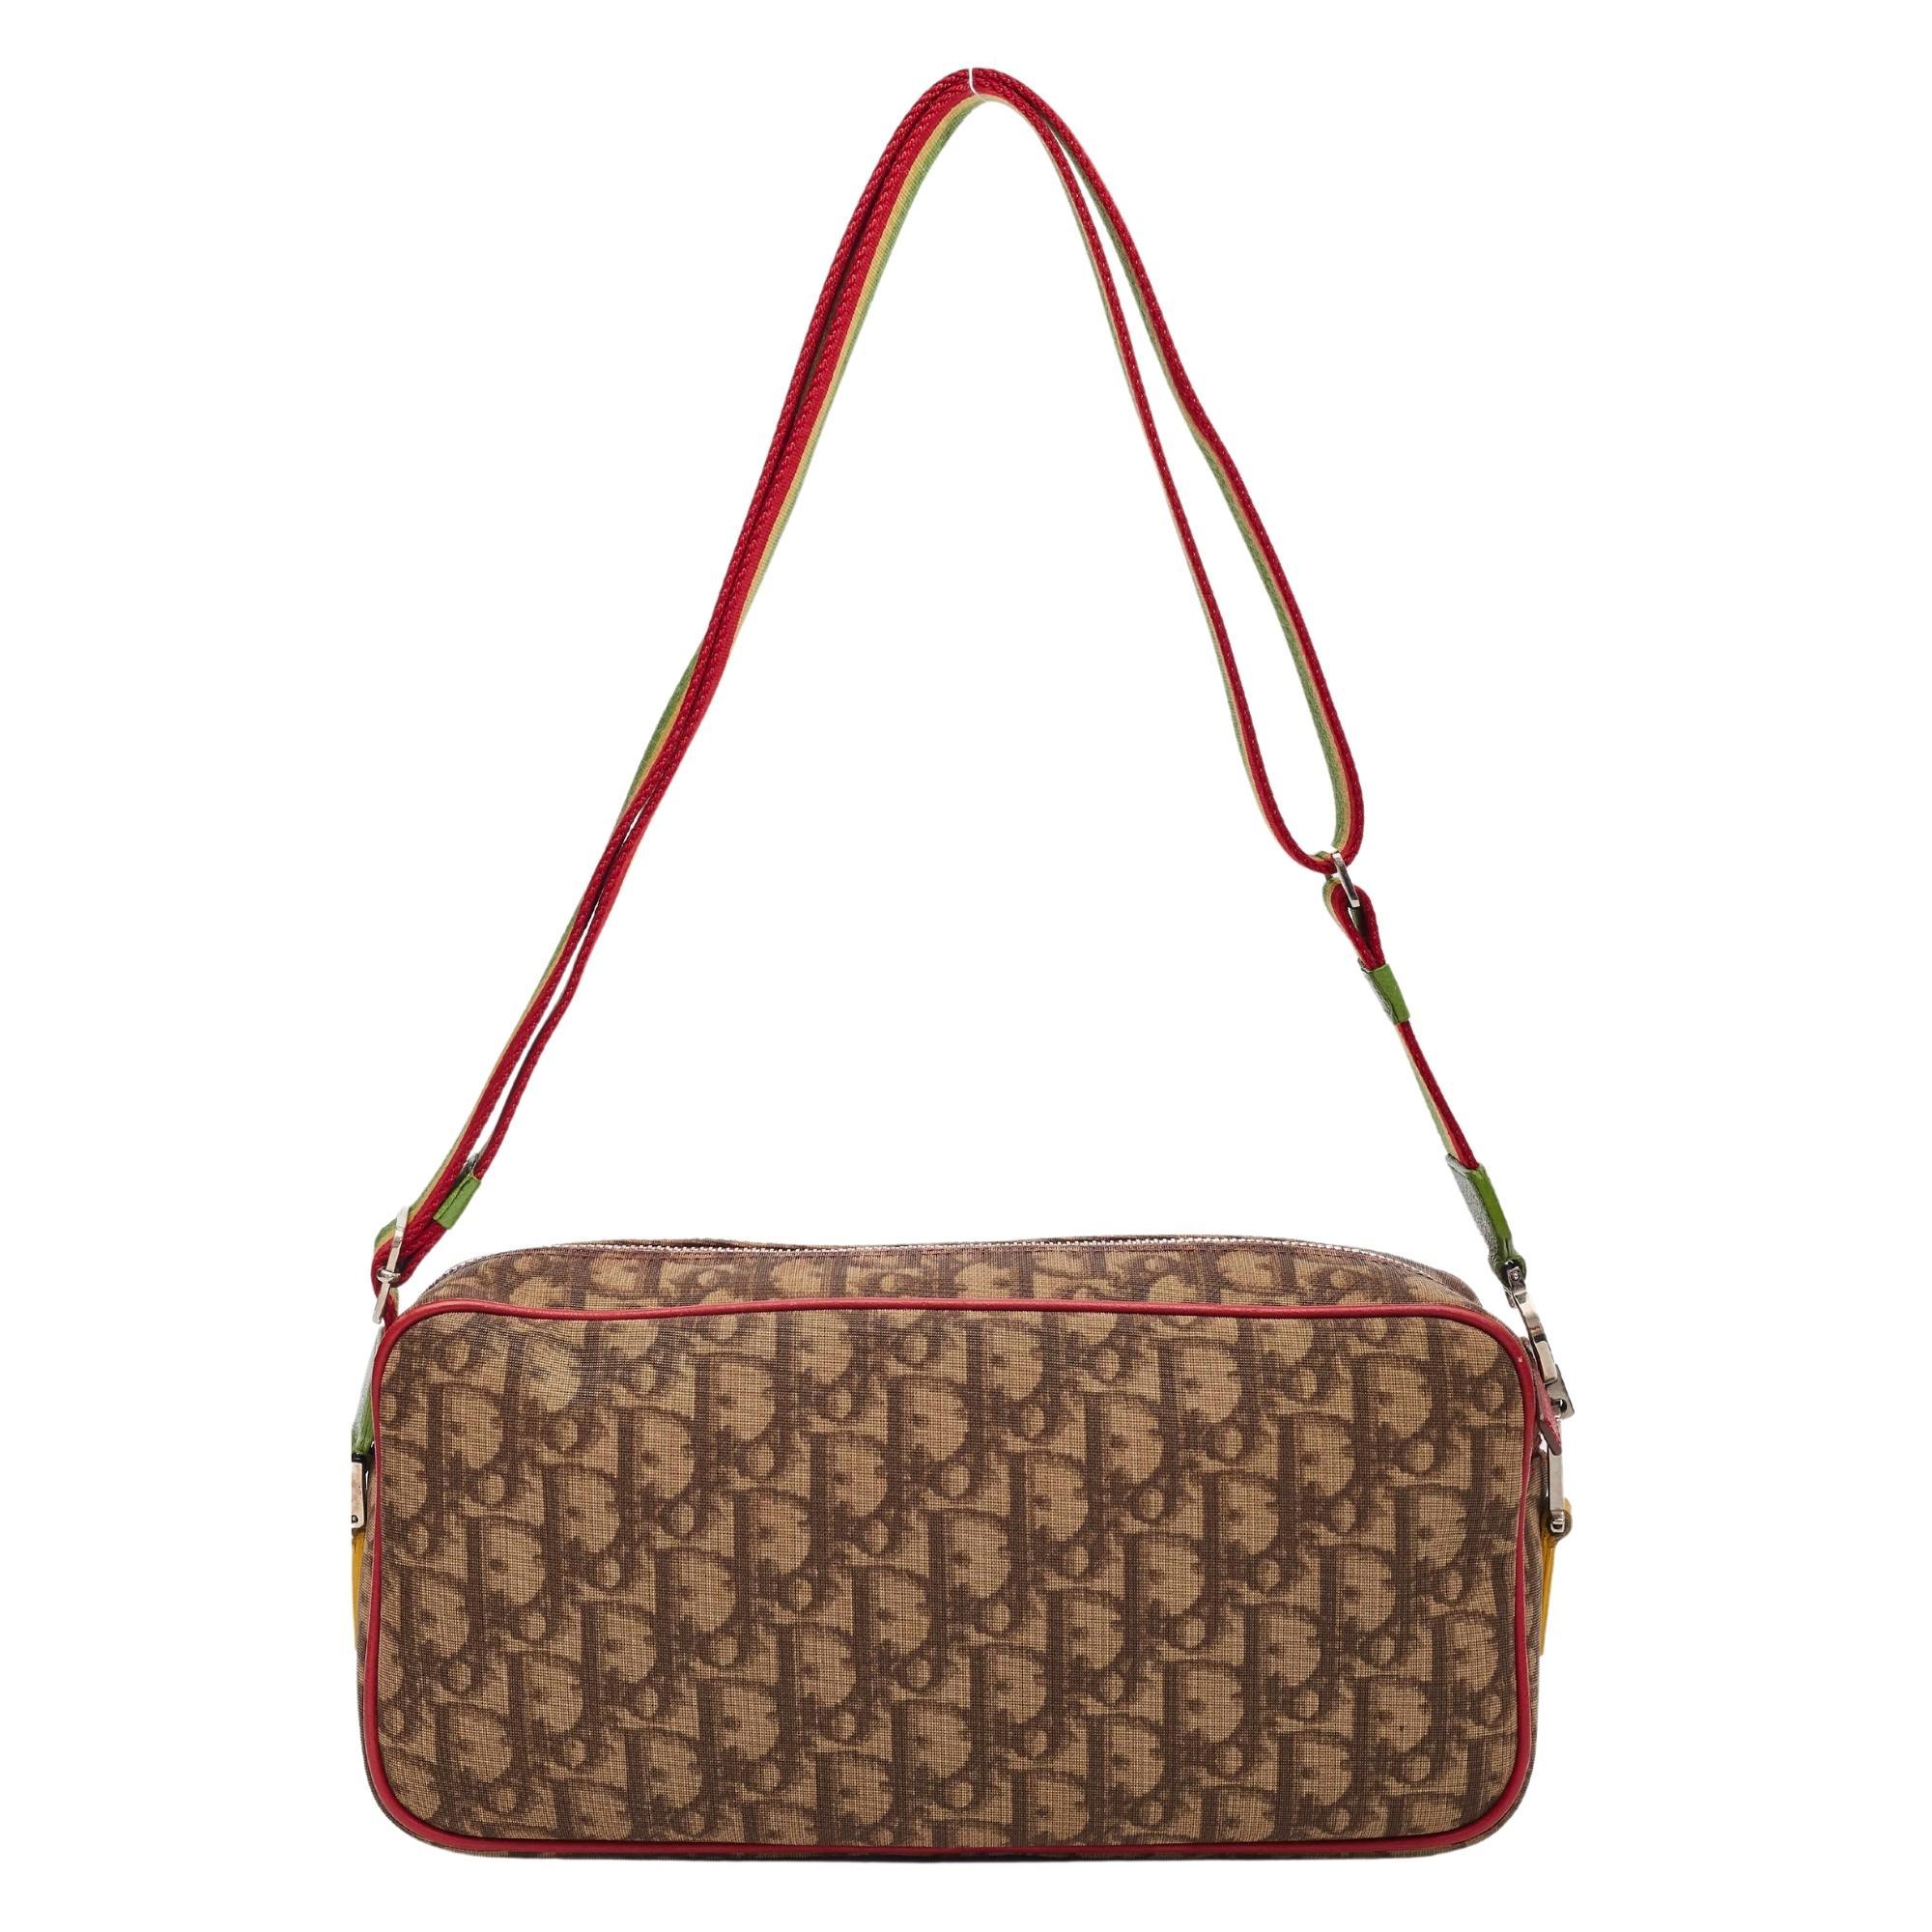 Color: brown monogram oblique with rasta pattern finishes
Material: Coated canvas
Date code: 05-MA-0094
Year 2004
Height 5” x Length 11” x Depth 2.5”
Comes with: Dust bag
Condition: The item shows signs of wear and use. Surface scratches, slight